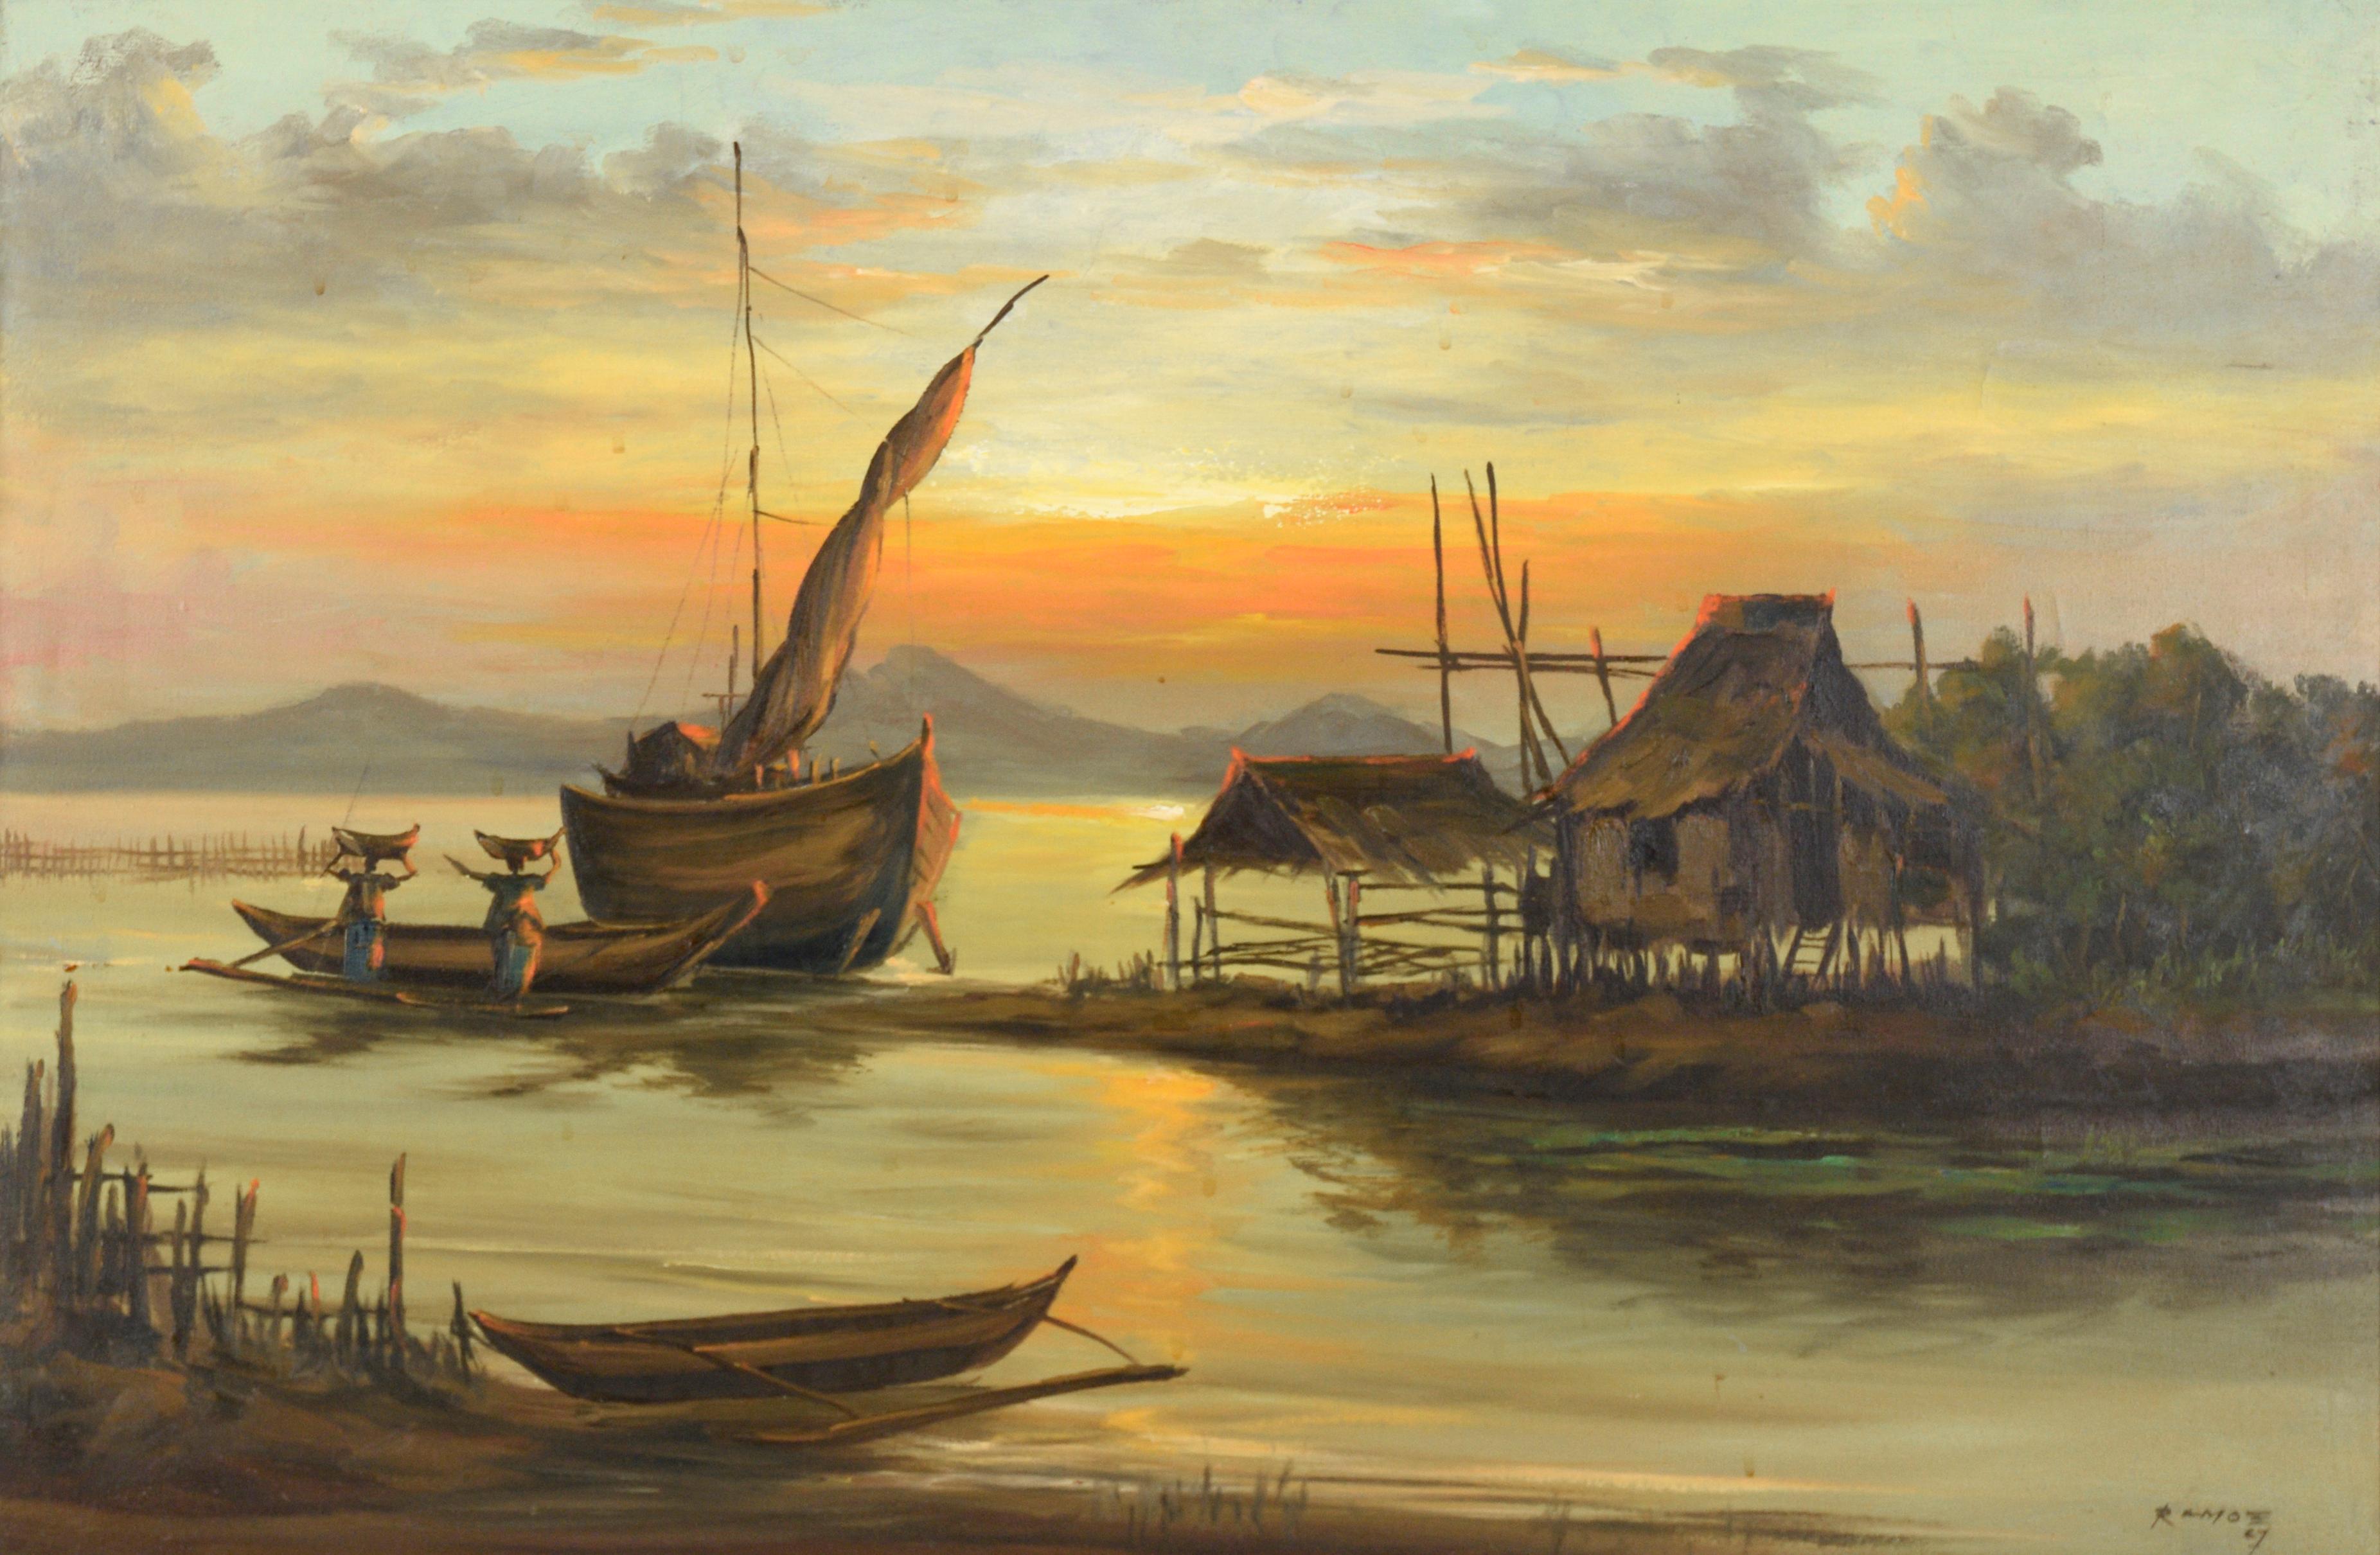 Fishing Village at Sunset by Ramos Philippines  - Painting by Unknown